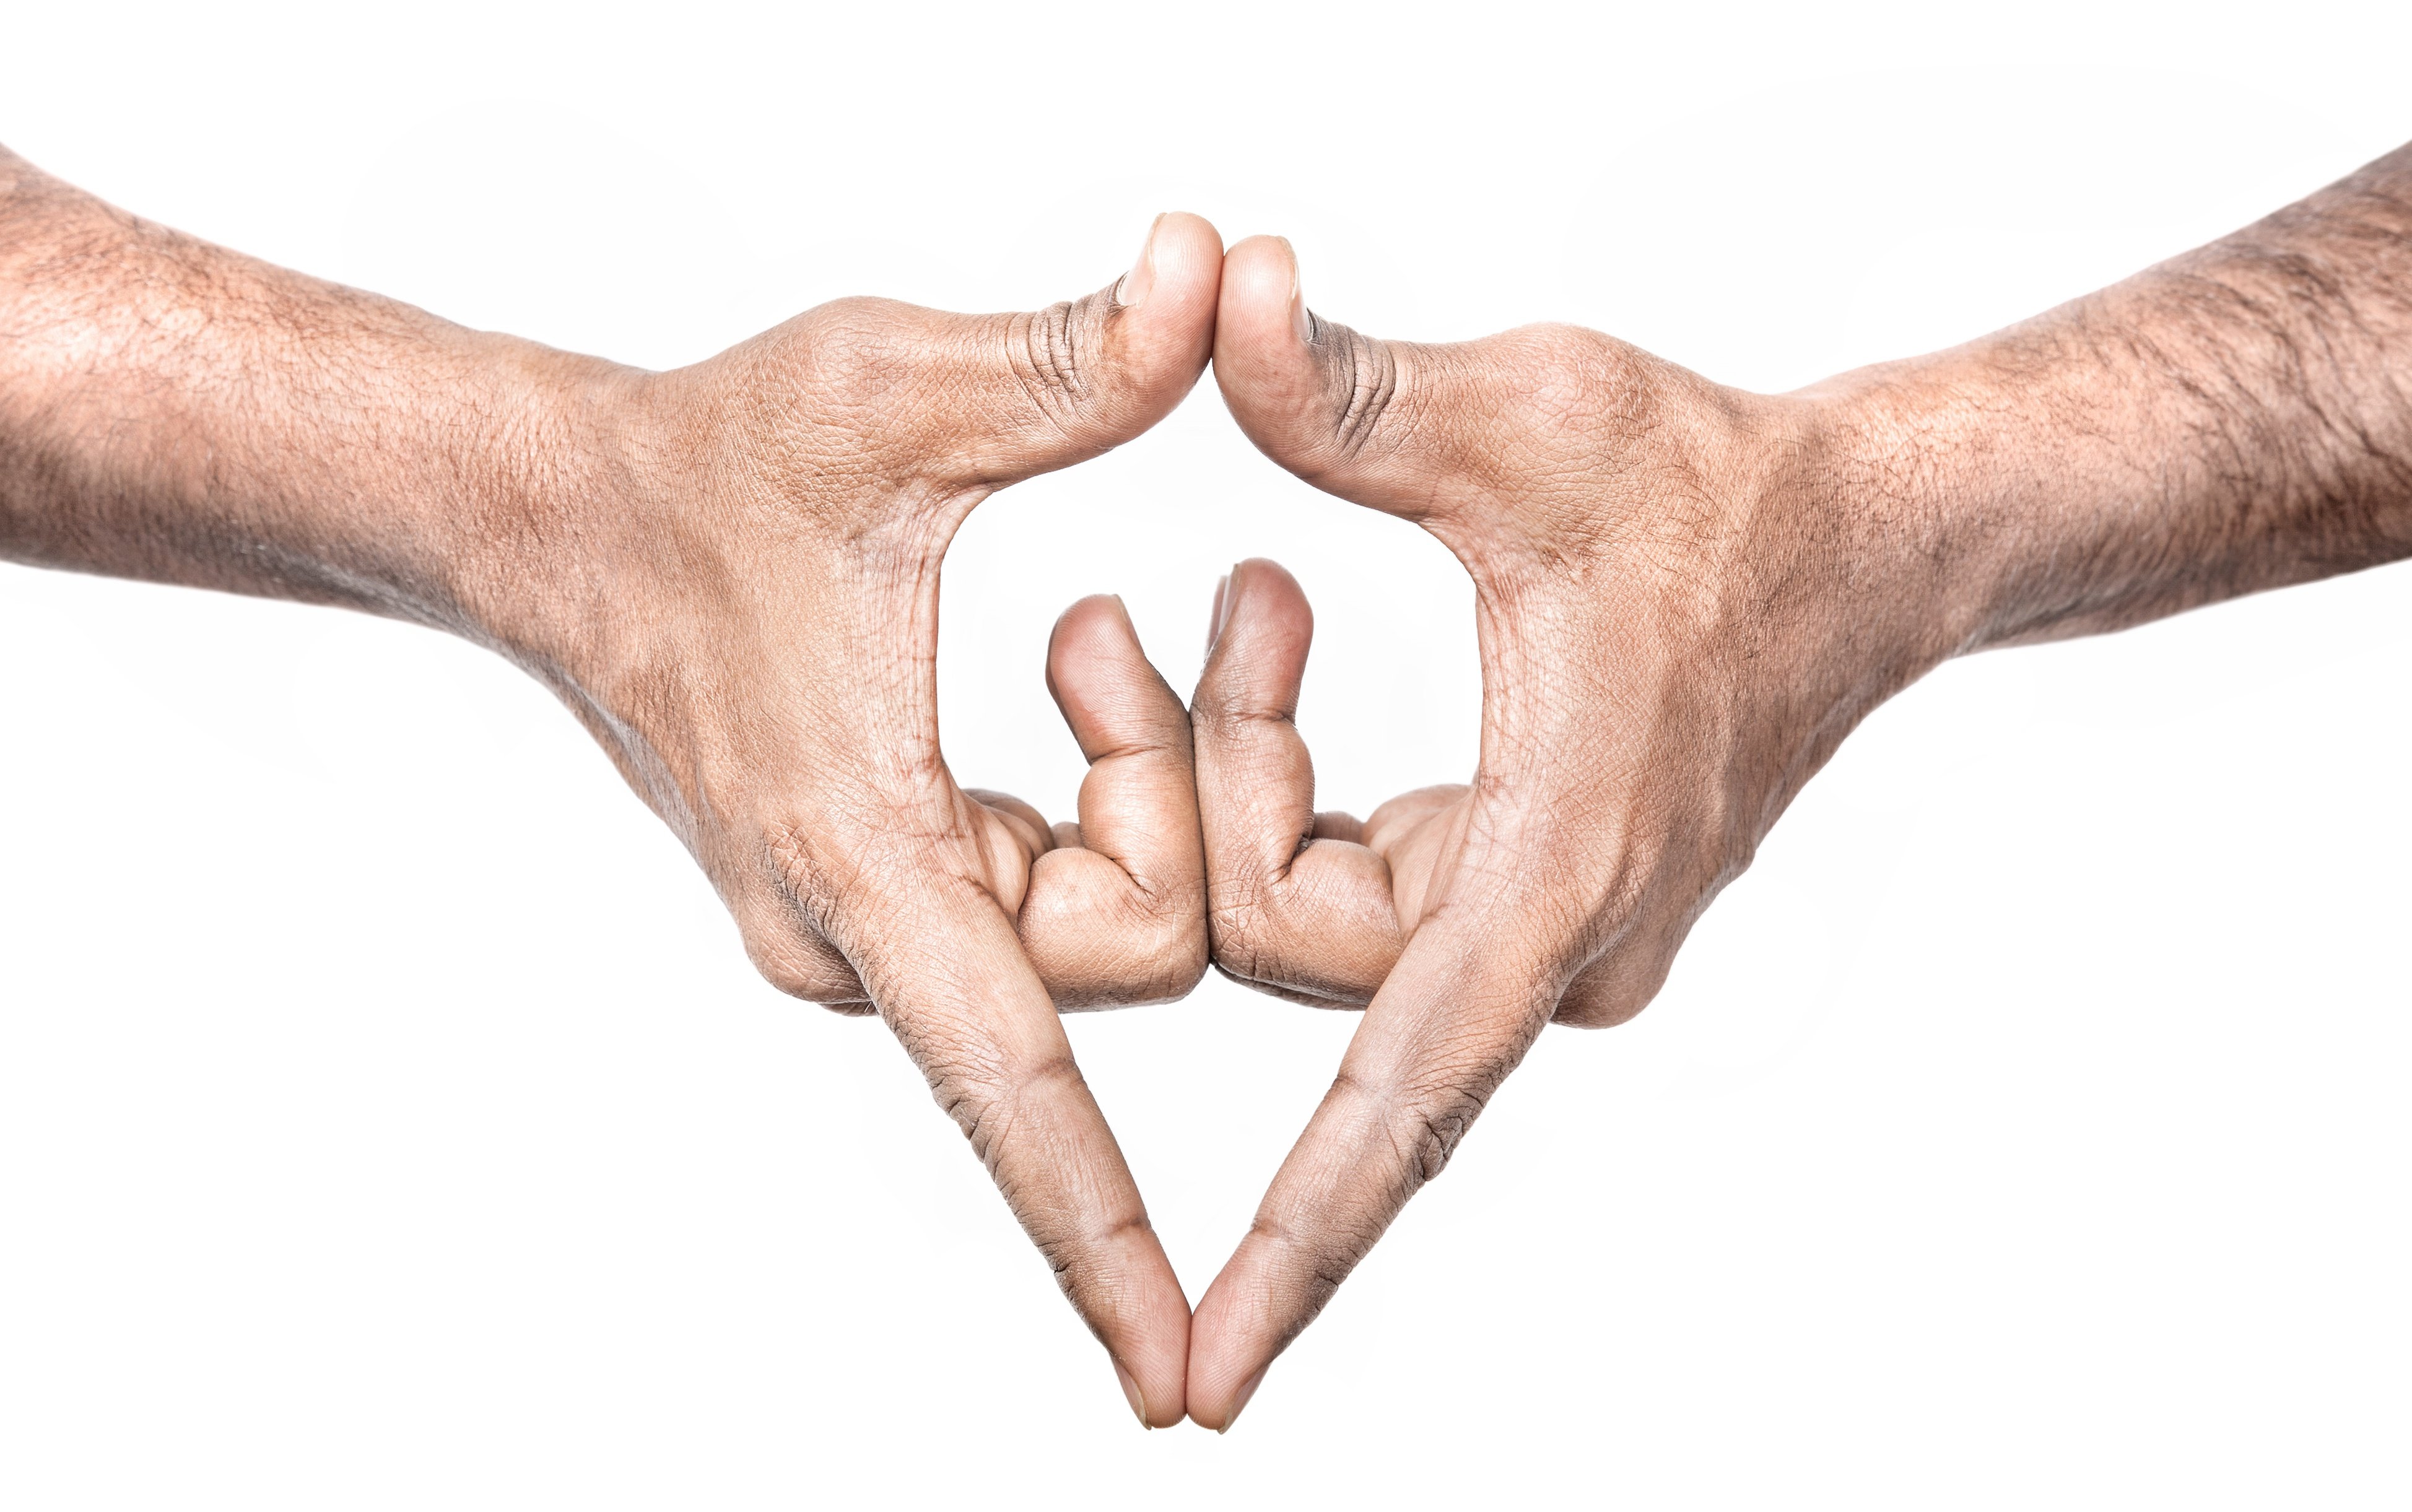 This is the hand gesture used in Yoga to represent a woman's vulva.